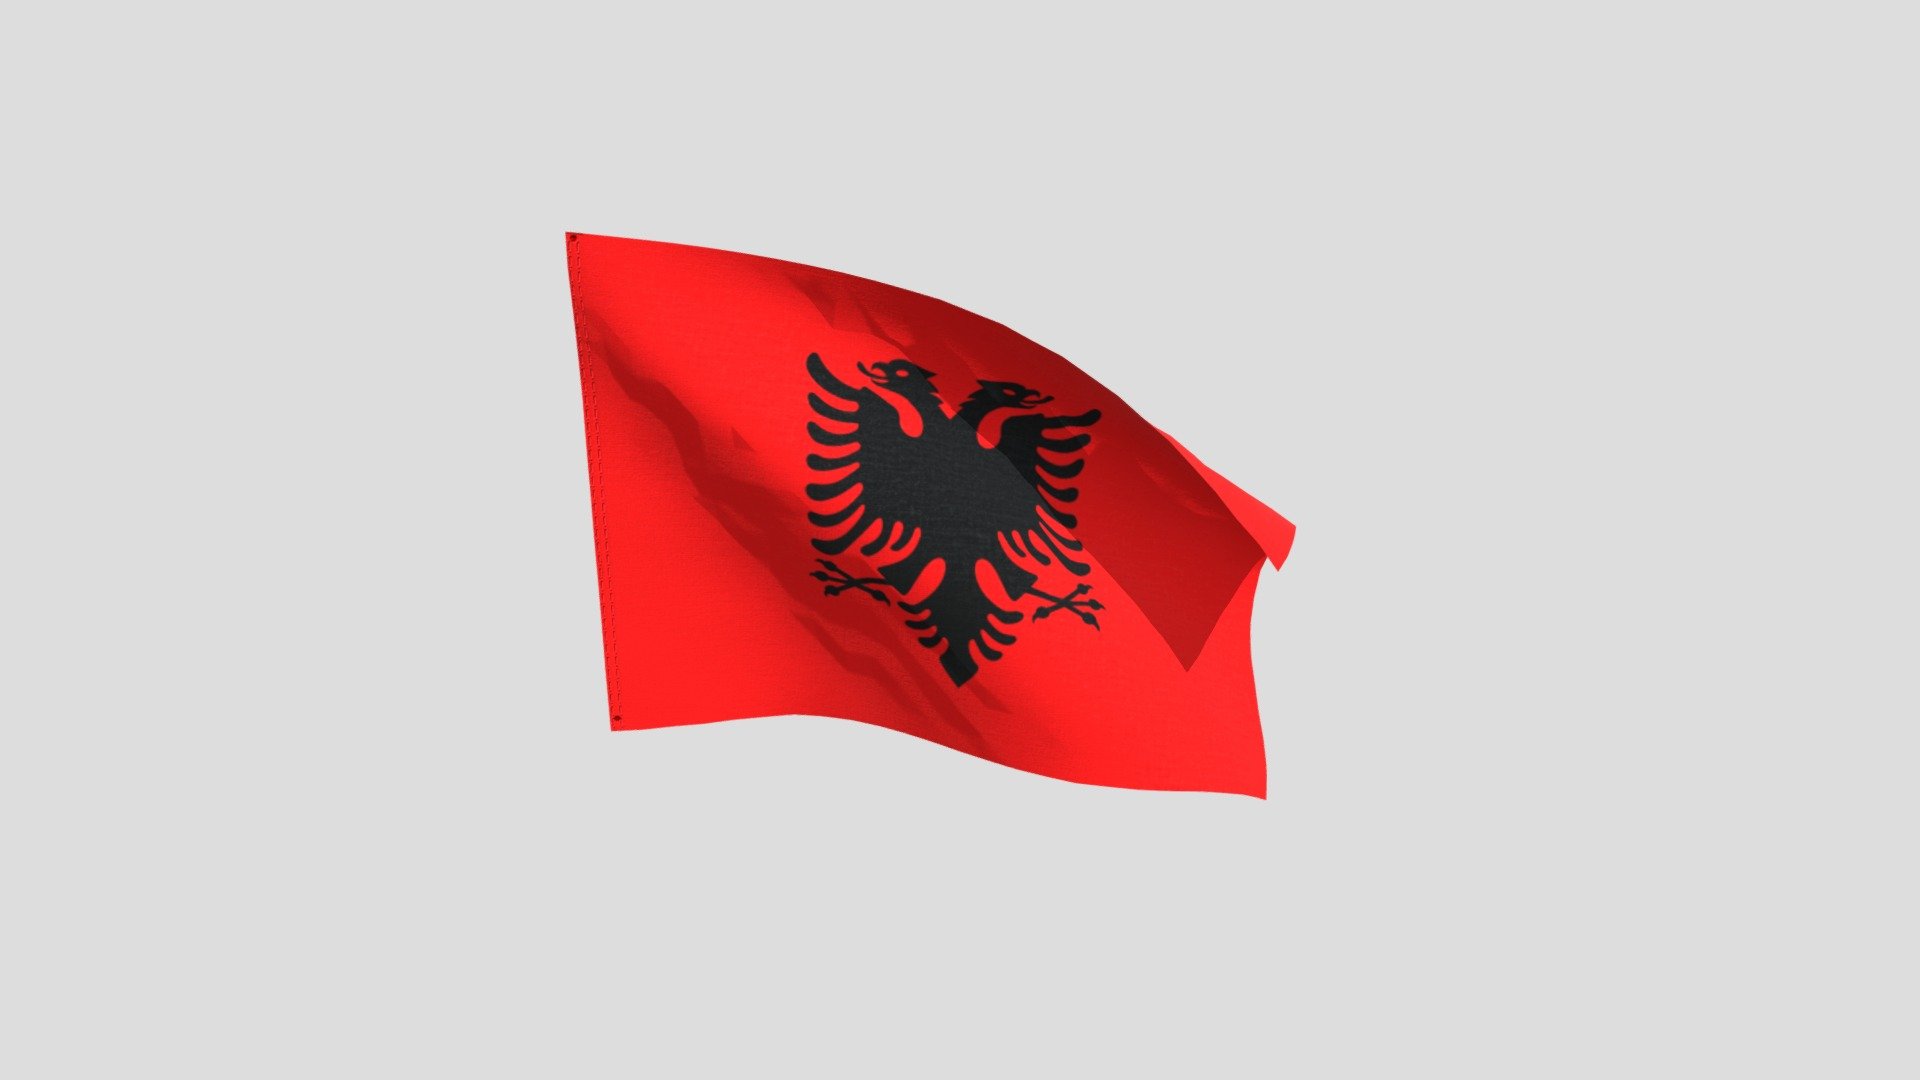 Albania is a country in Southeastern Europe. It is located on the Adriatic and Ionian Sea within the Mediterranean Sea and shares land borders with Montenegro to the northwest, Kosovo to the northeast, North Macedonia to the east and Greece to the south. Tirana is its capital and largest city, followed by Durrës, Vlorë and Shkodër 3d model